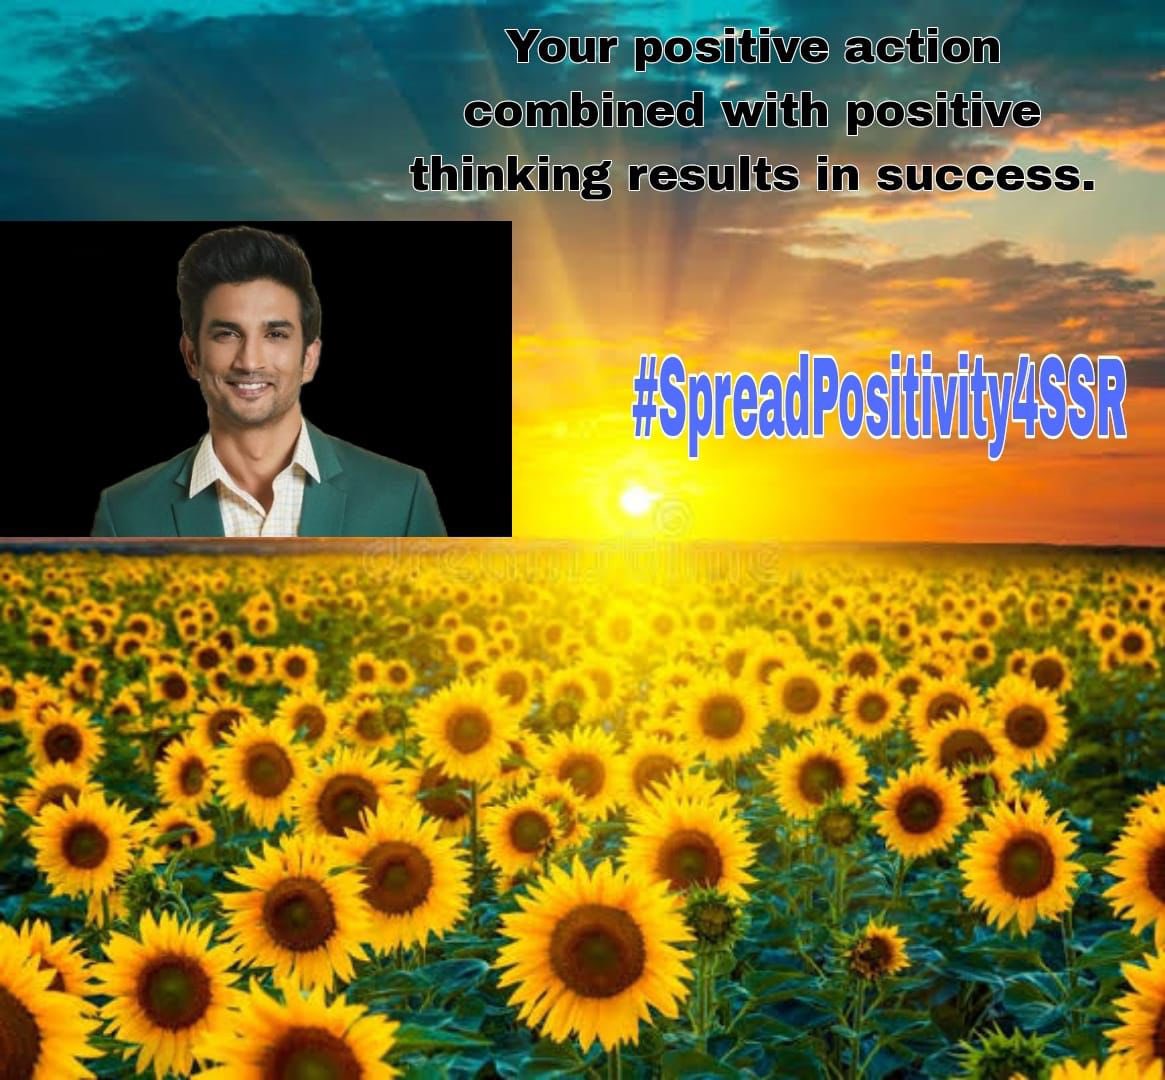 A positive attitude causes a chain reaction of positive thoughts, events and outcomes. It is a catalyst 4 extraordinary results. Stay positive in every situation and never stop trying. Have faith and let's move forward with courage and positivity #SpreadPositivity4SSR